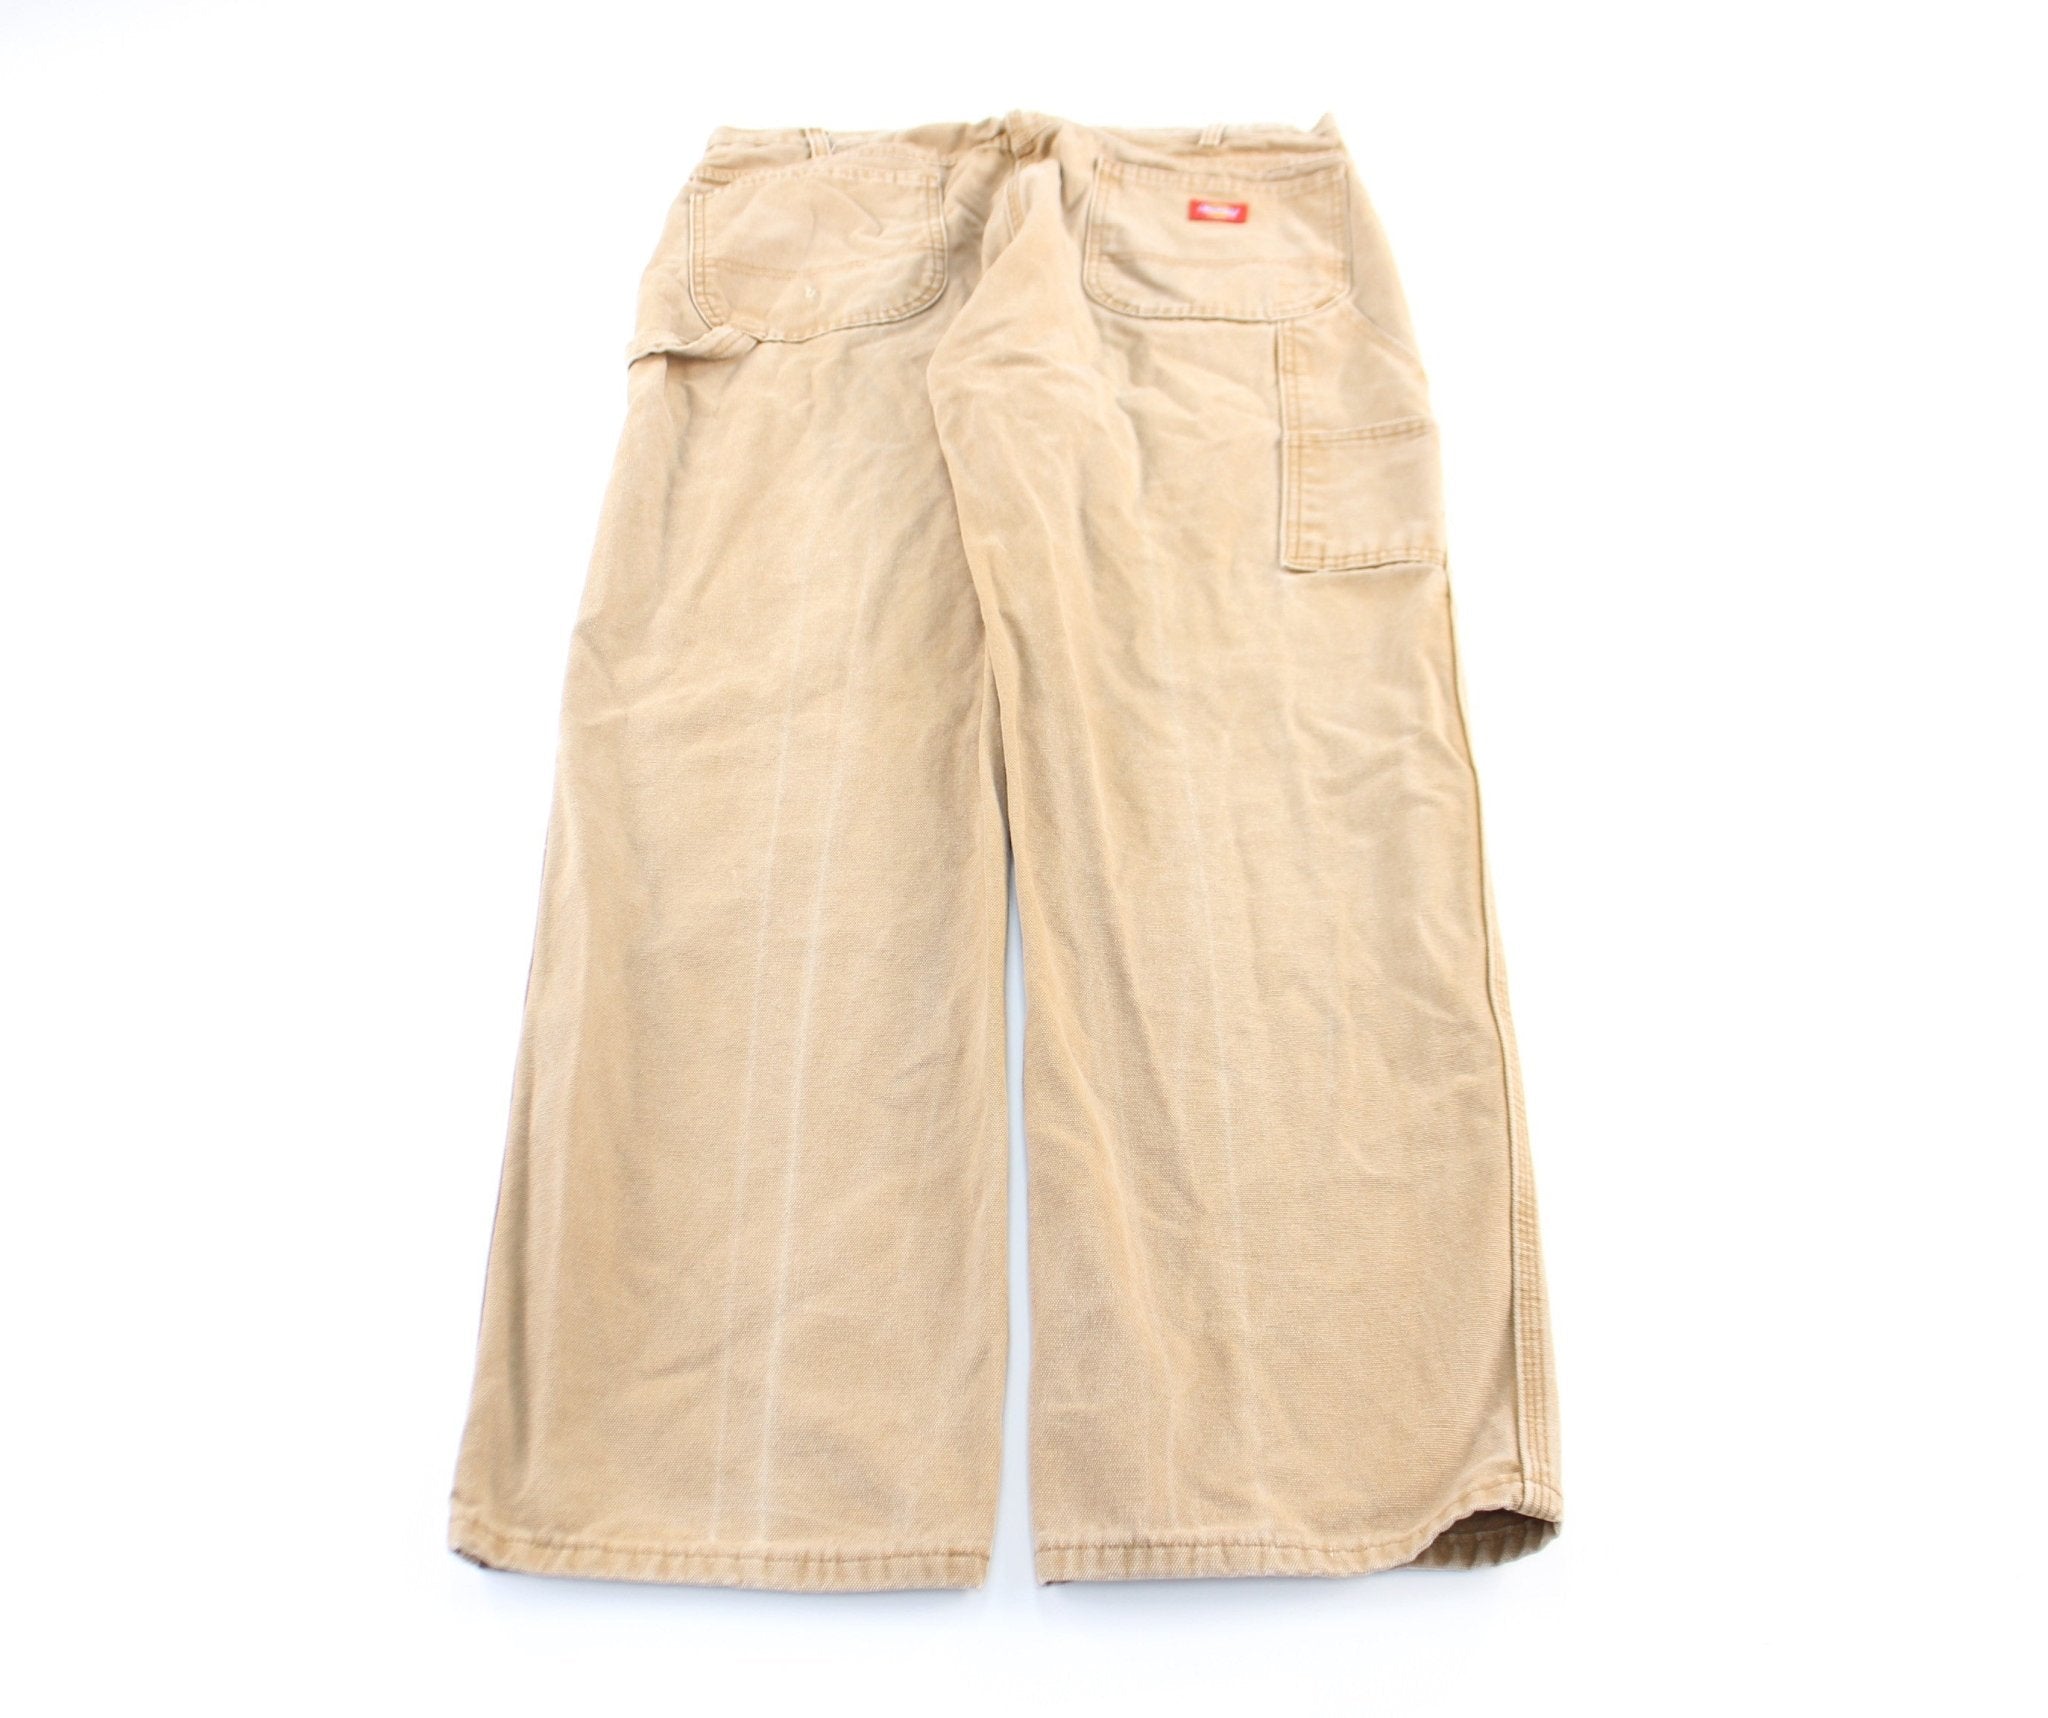 Dickie's Logo Patch Tan Workwear Pants - ThriftedThreads.com